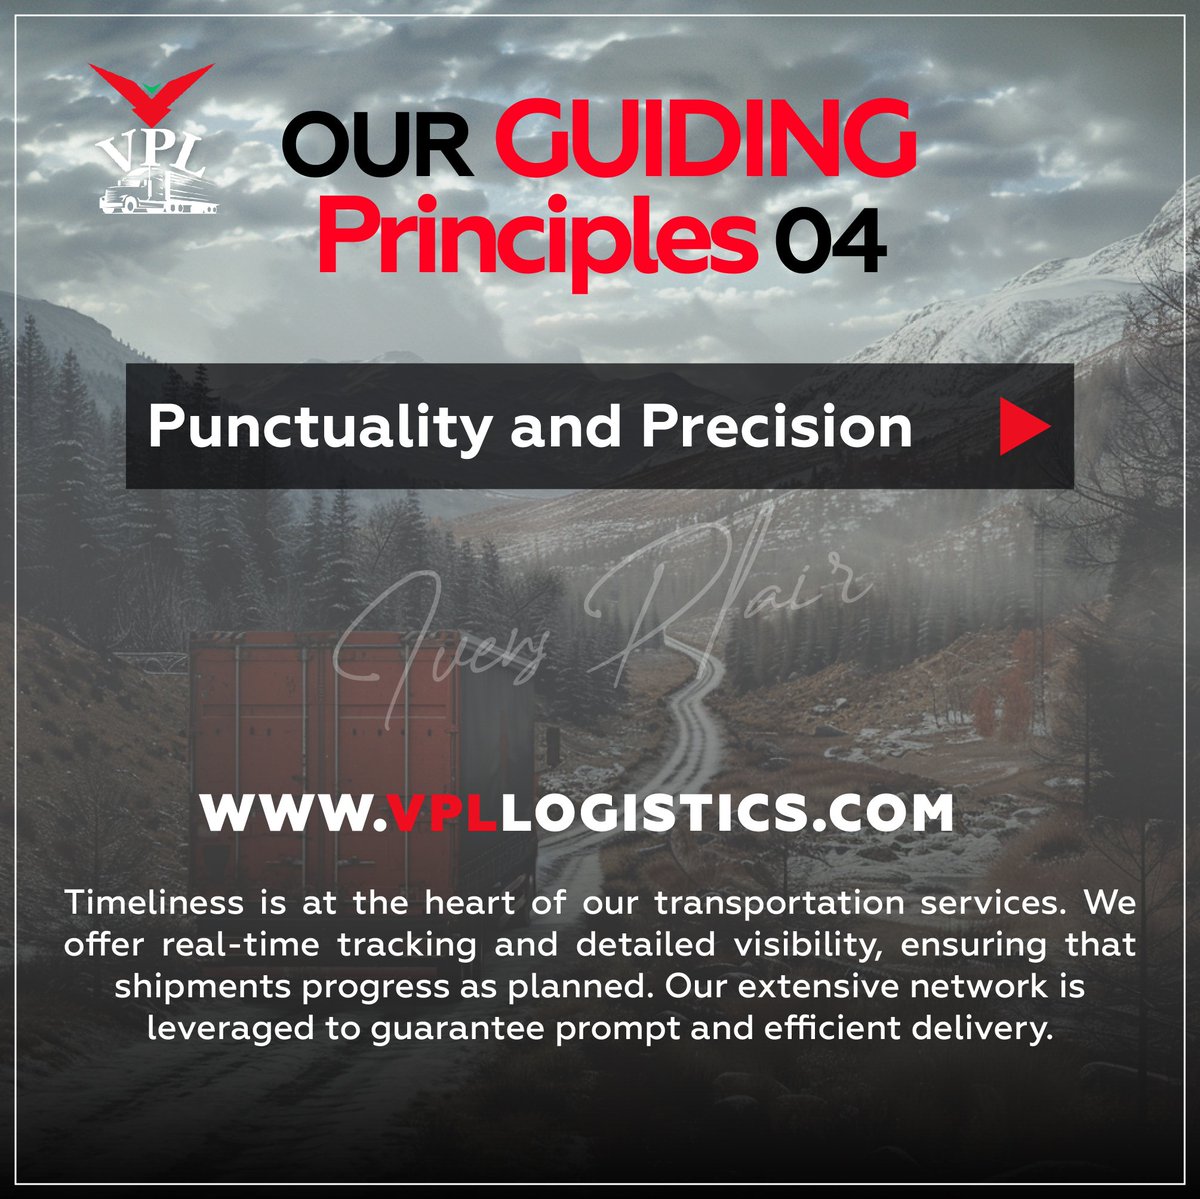 Punctuality and Precision

Timeliness is at the heart of our transportation services.

#freight #vensplailogistics #freightrecession